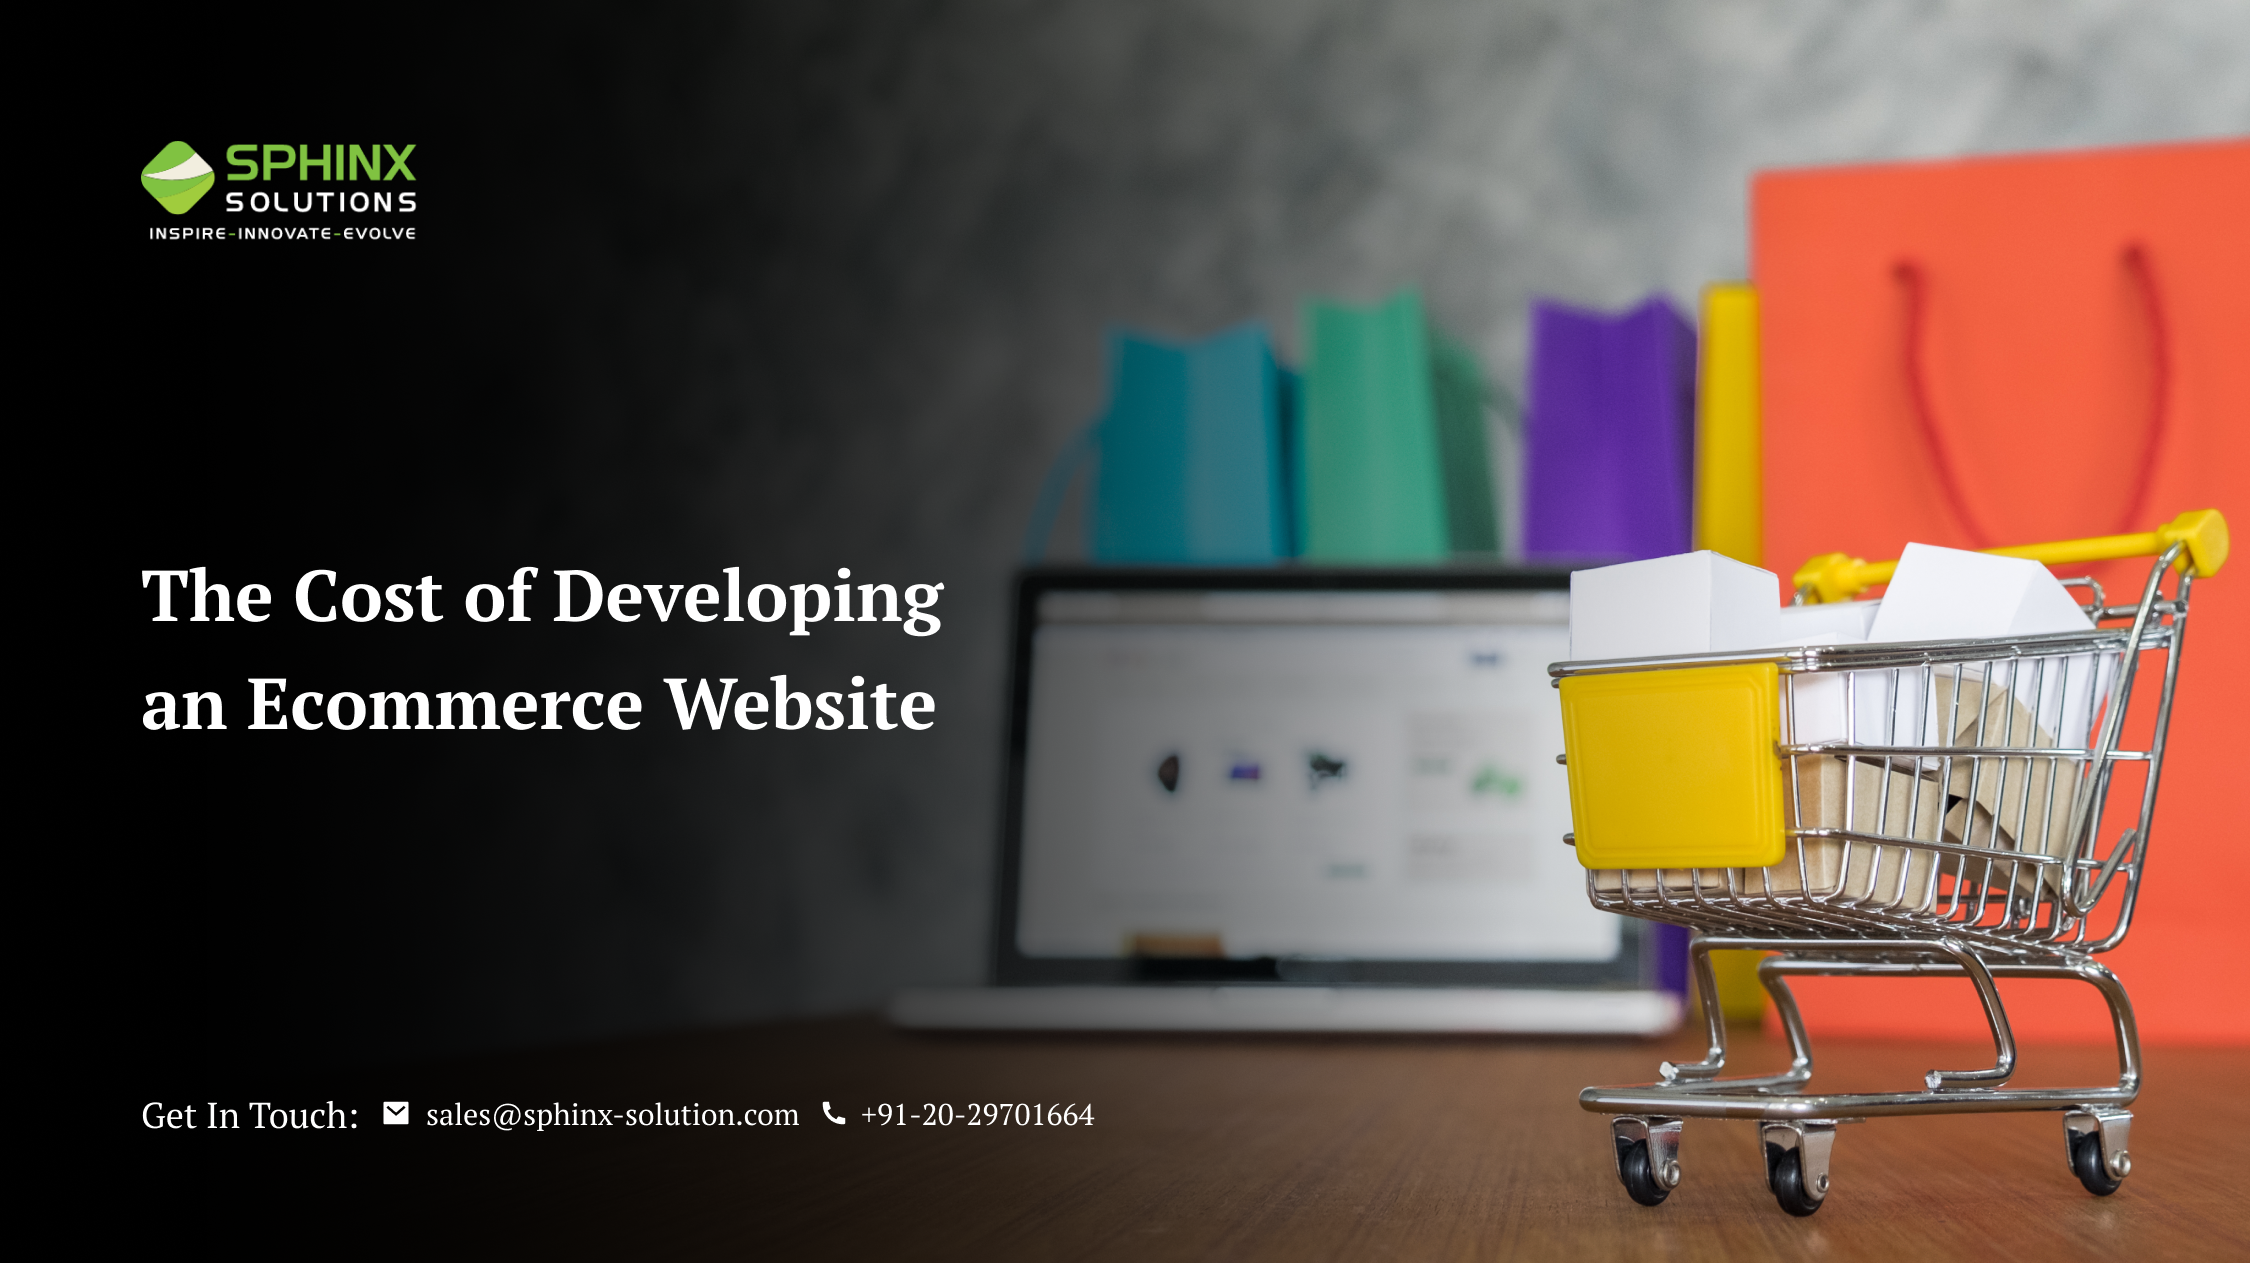 SPHINX

INSPIRE- INNOVATE - EVOLVE

The Cost of Developing
an Ecommerce Website

 

Get In Touch: sales@sphinx-solution.com % +91-20-29701664 - SPHINX

INSPIRE- INNOVATE - EVOLVE

The Cost of Developing
an Ecommerce Website

 

Get In Touch: sales@sphinx-solution.com % +91-20-29701664